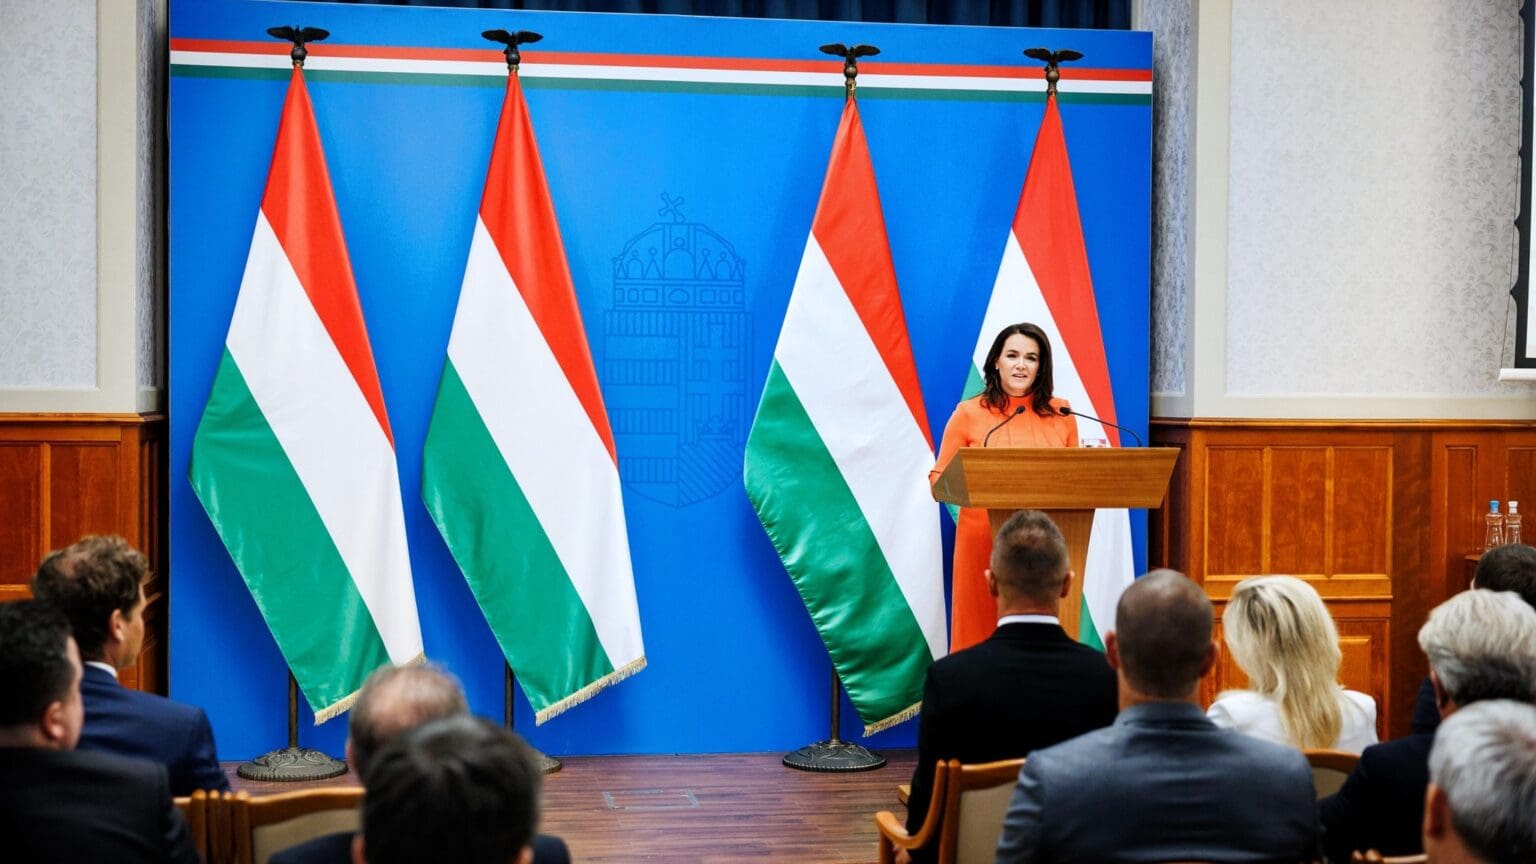 Katalin Novák: Hungary Is a Reliable Ally that Can Be Counted On